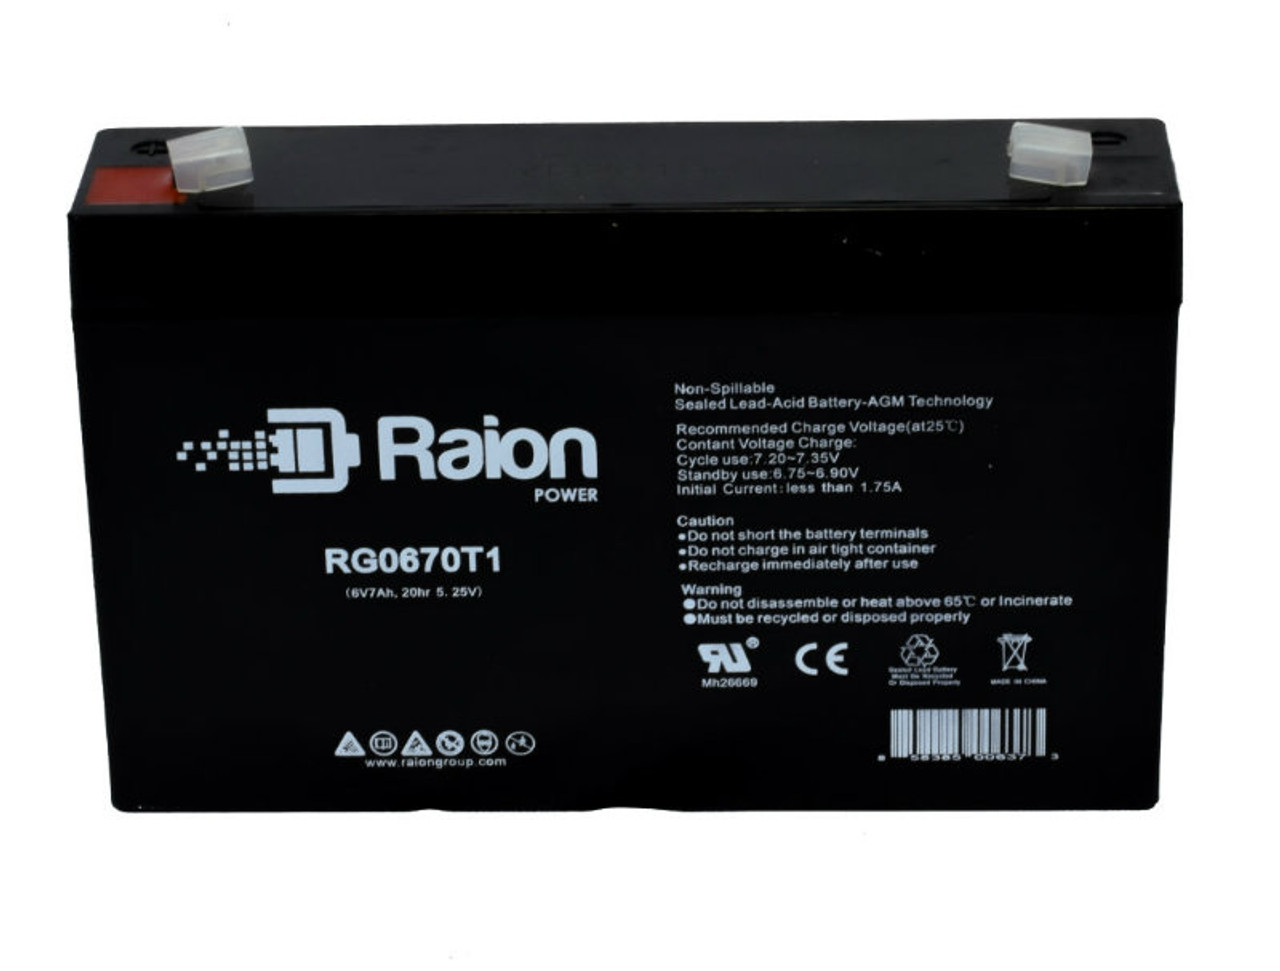 Raion Power RG0670T1 Replacement Battery Cartridge for Kid Motorz 0845 Shelby Cobra Blue